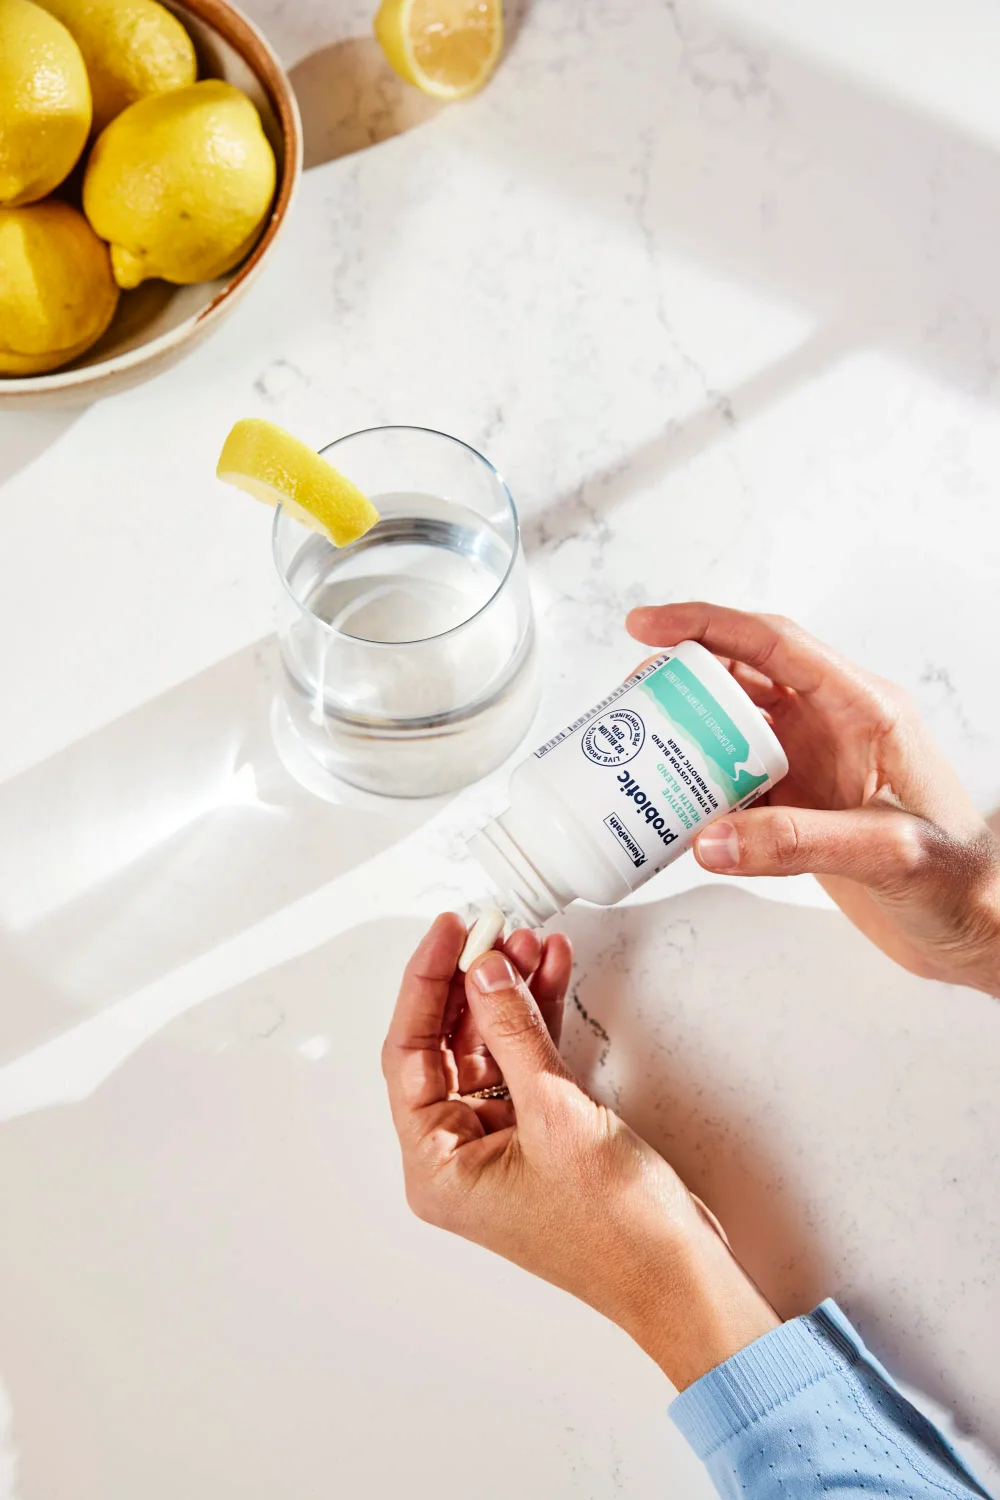 Top-view shot of a hand pouring out a NativePath Probiotic capsule into her other hand. Bowl of lemons and a glass of water in the background.